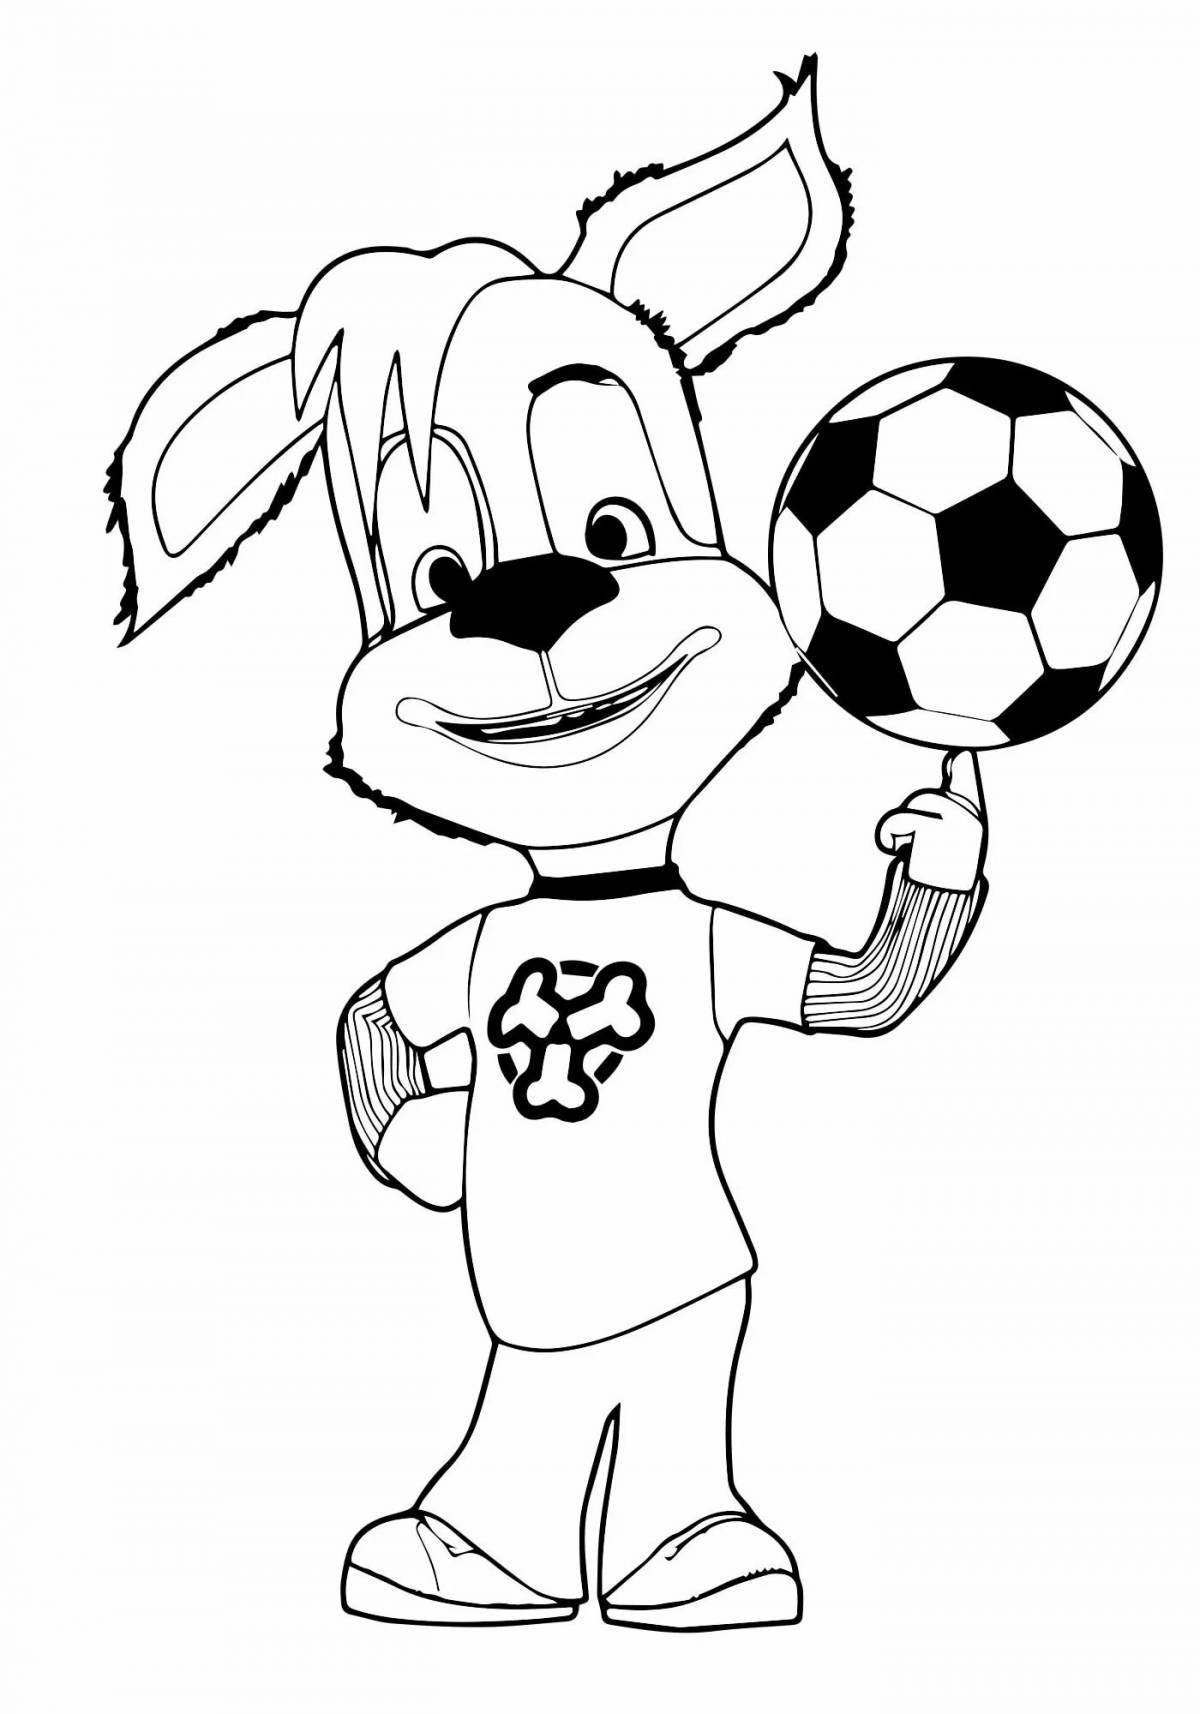 Bright barboskin coloring pages for kids